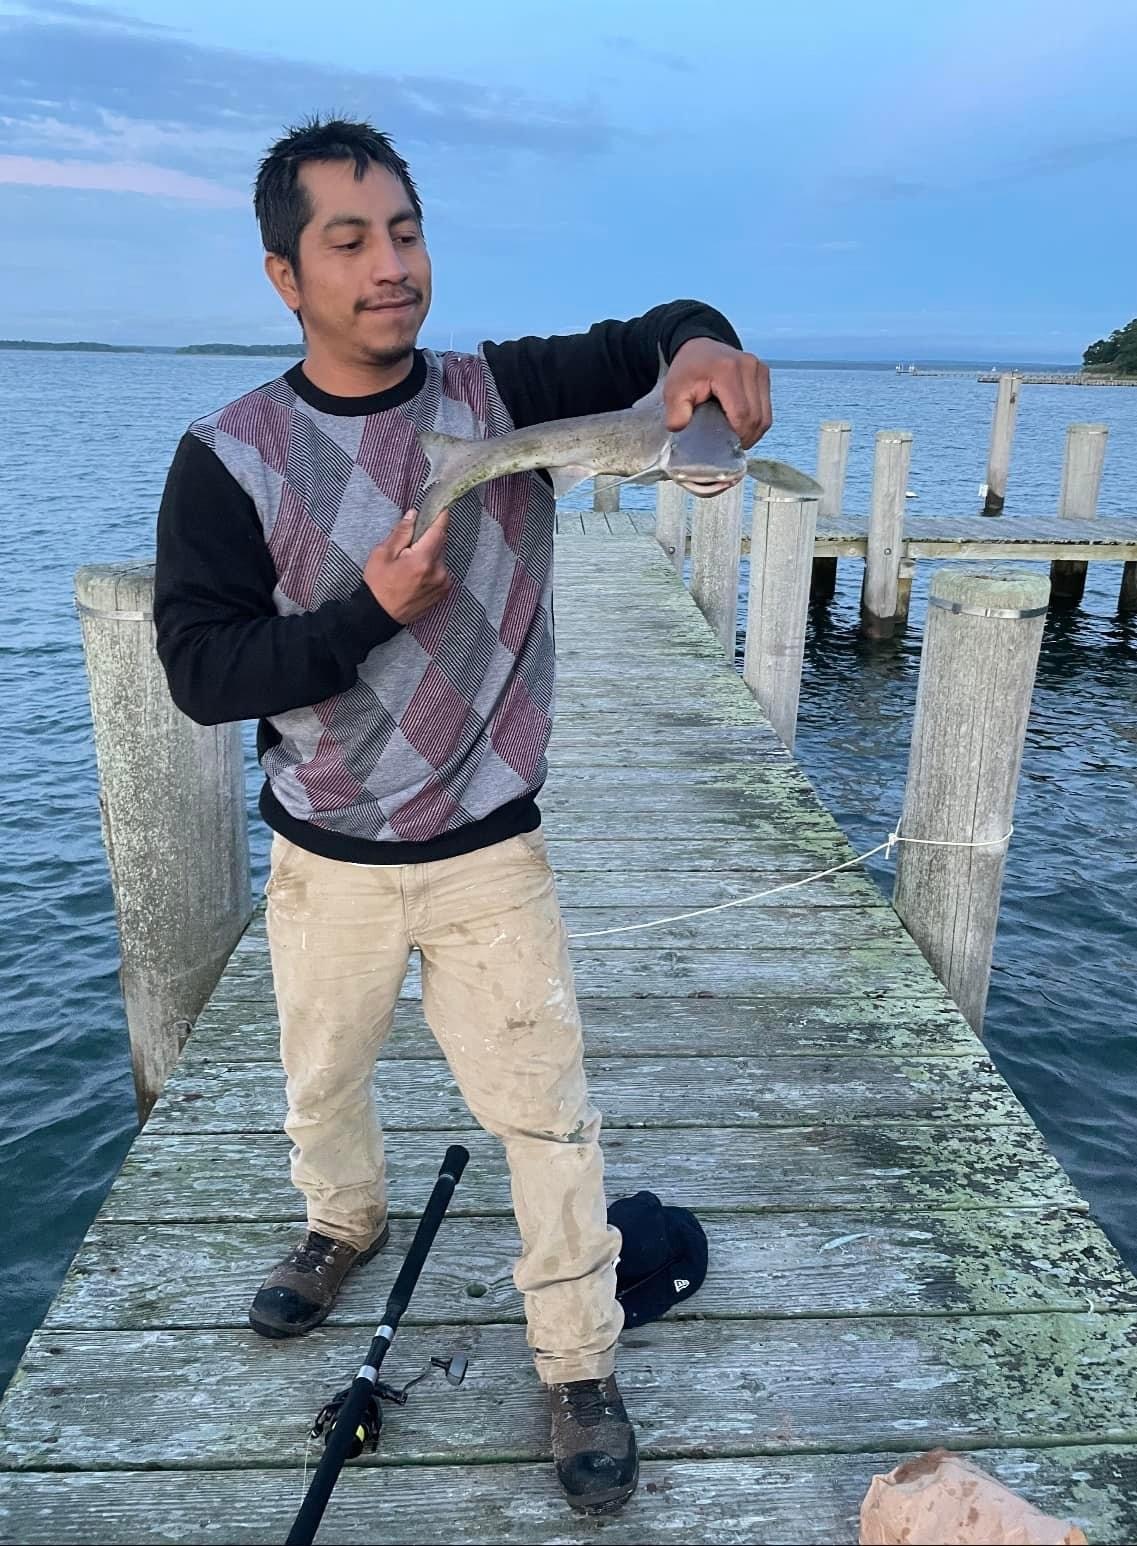 The body of Dario Cholua Rojas, who disappeared off North Haven after going out fishing after dark on October 19, has been identified.